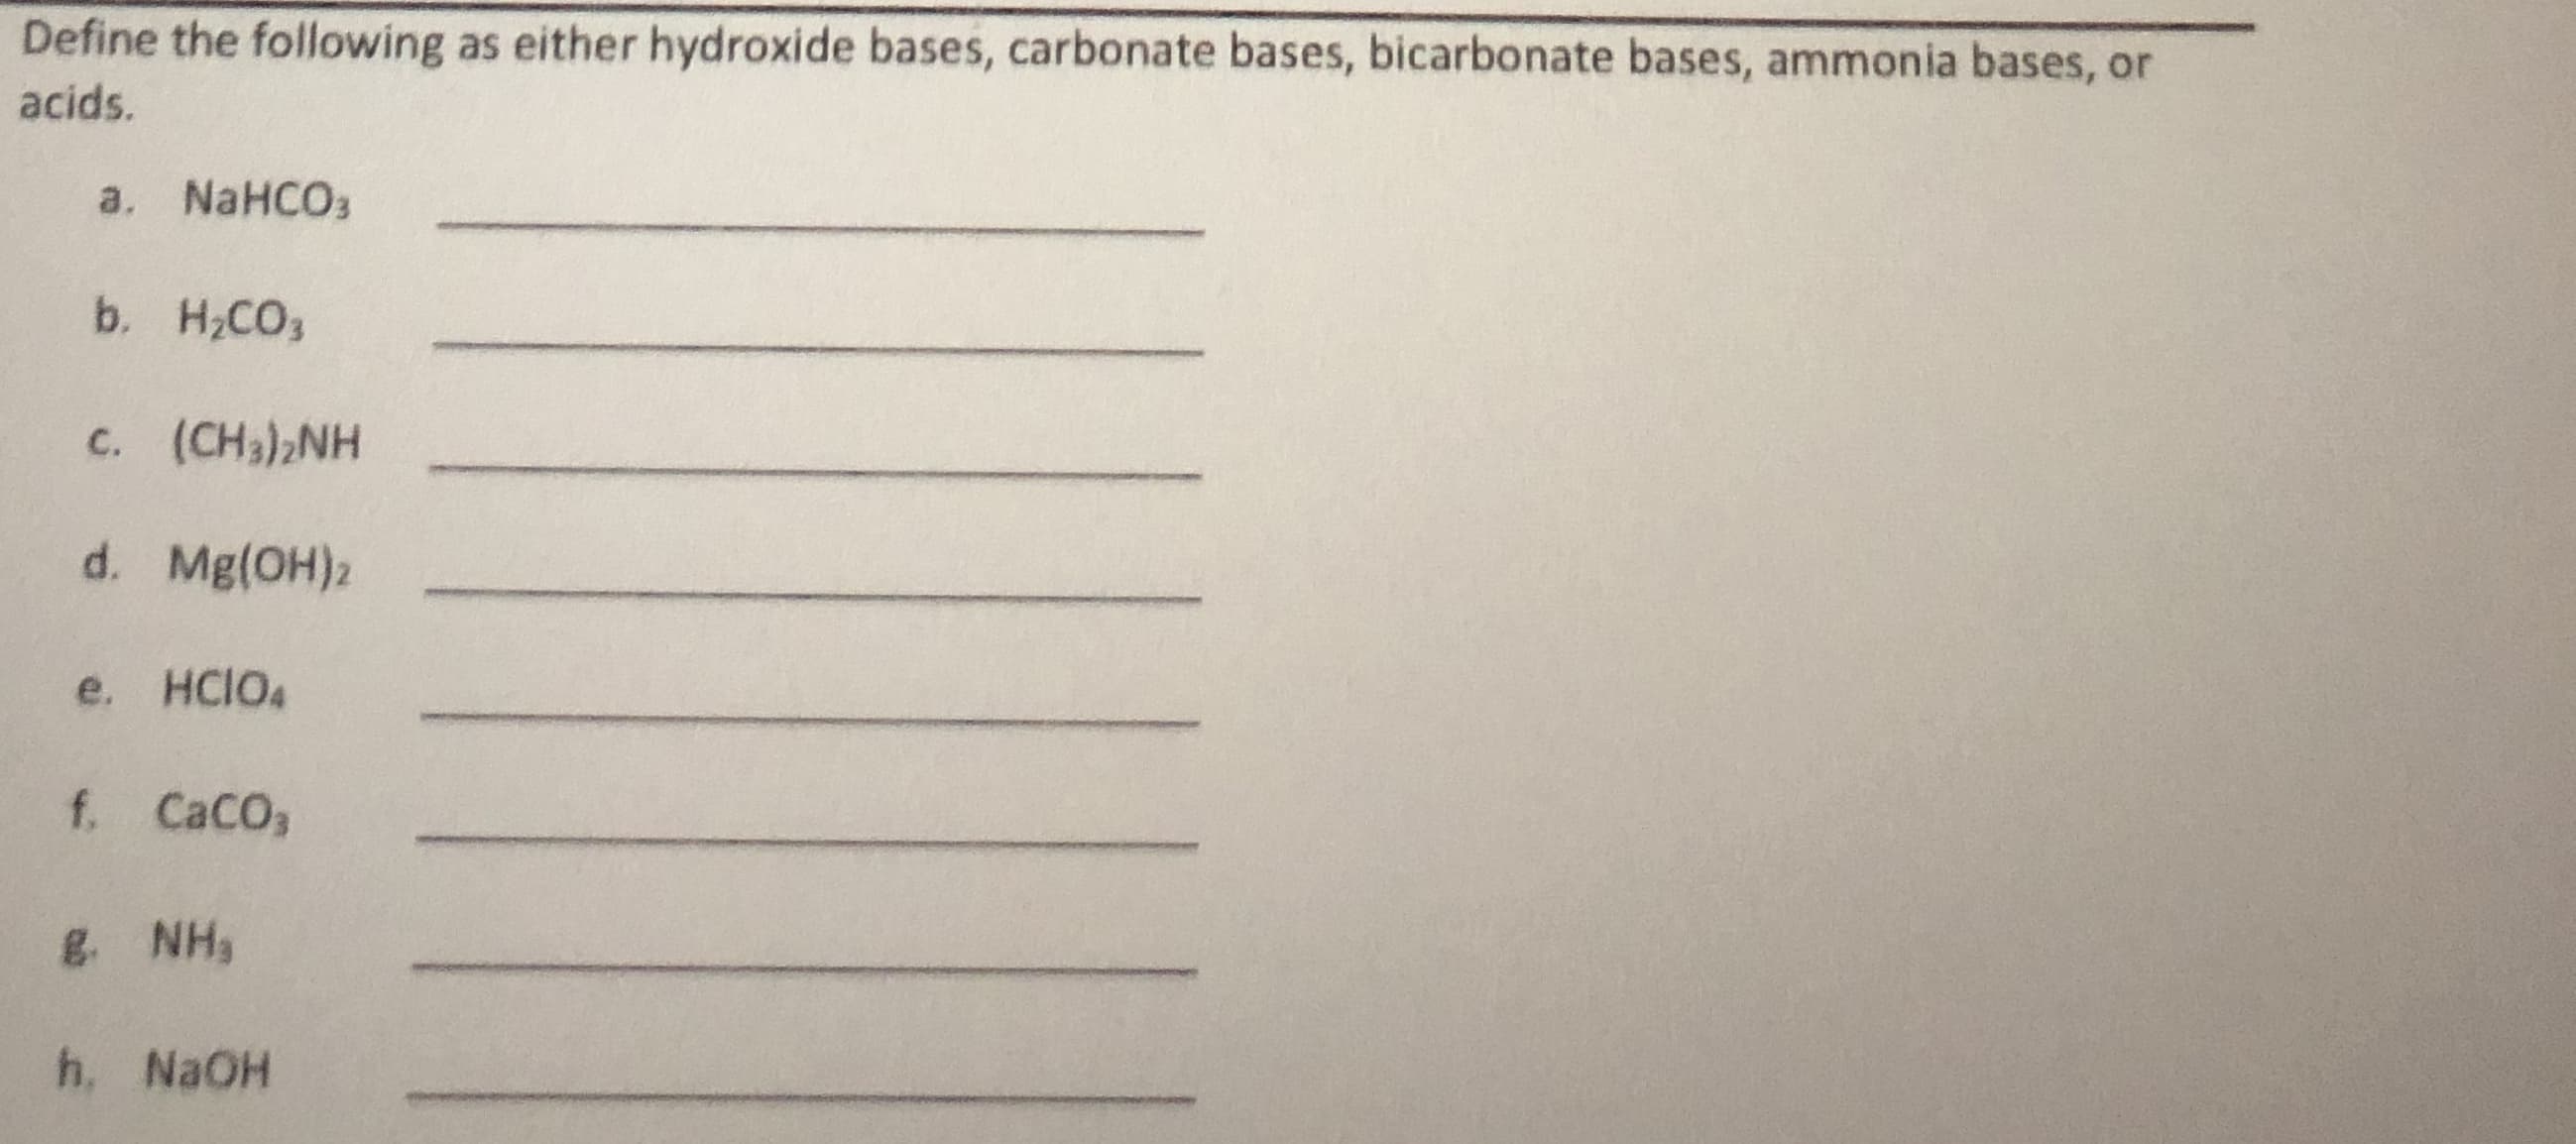 Define the following as either hydroxide bases, carbonate bases, bicarbonate bases, ammonia bases, or
acids.
a. NaHCO3
b. H2CO3
c. (CH3),NH
d. Mg(OH)2
e. HCIO4
f. CaCO,
g. NH,
h. NaOH
